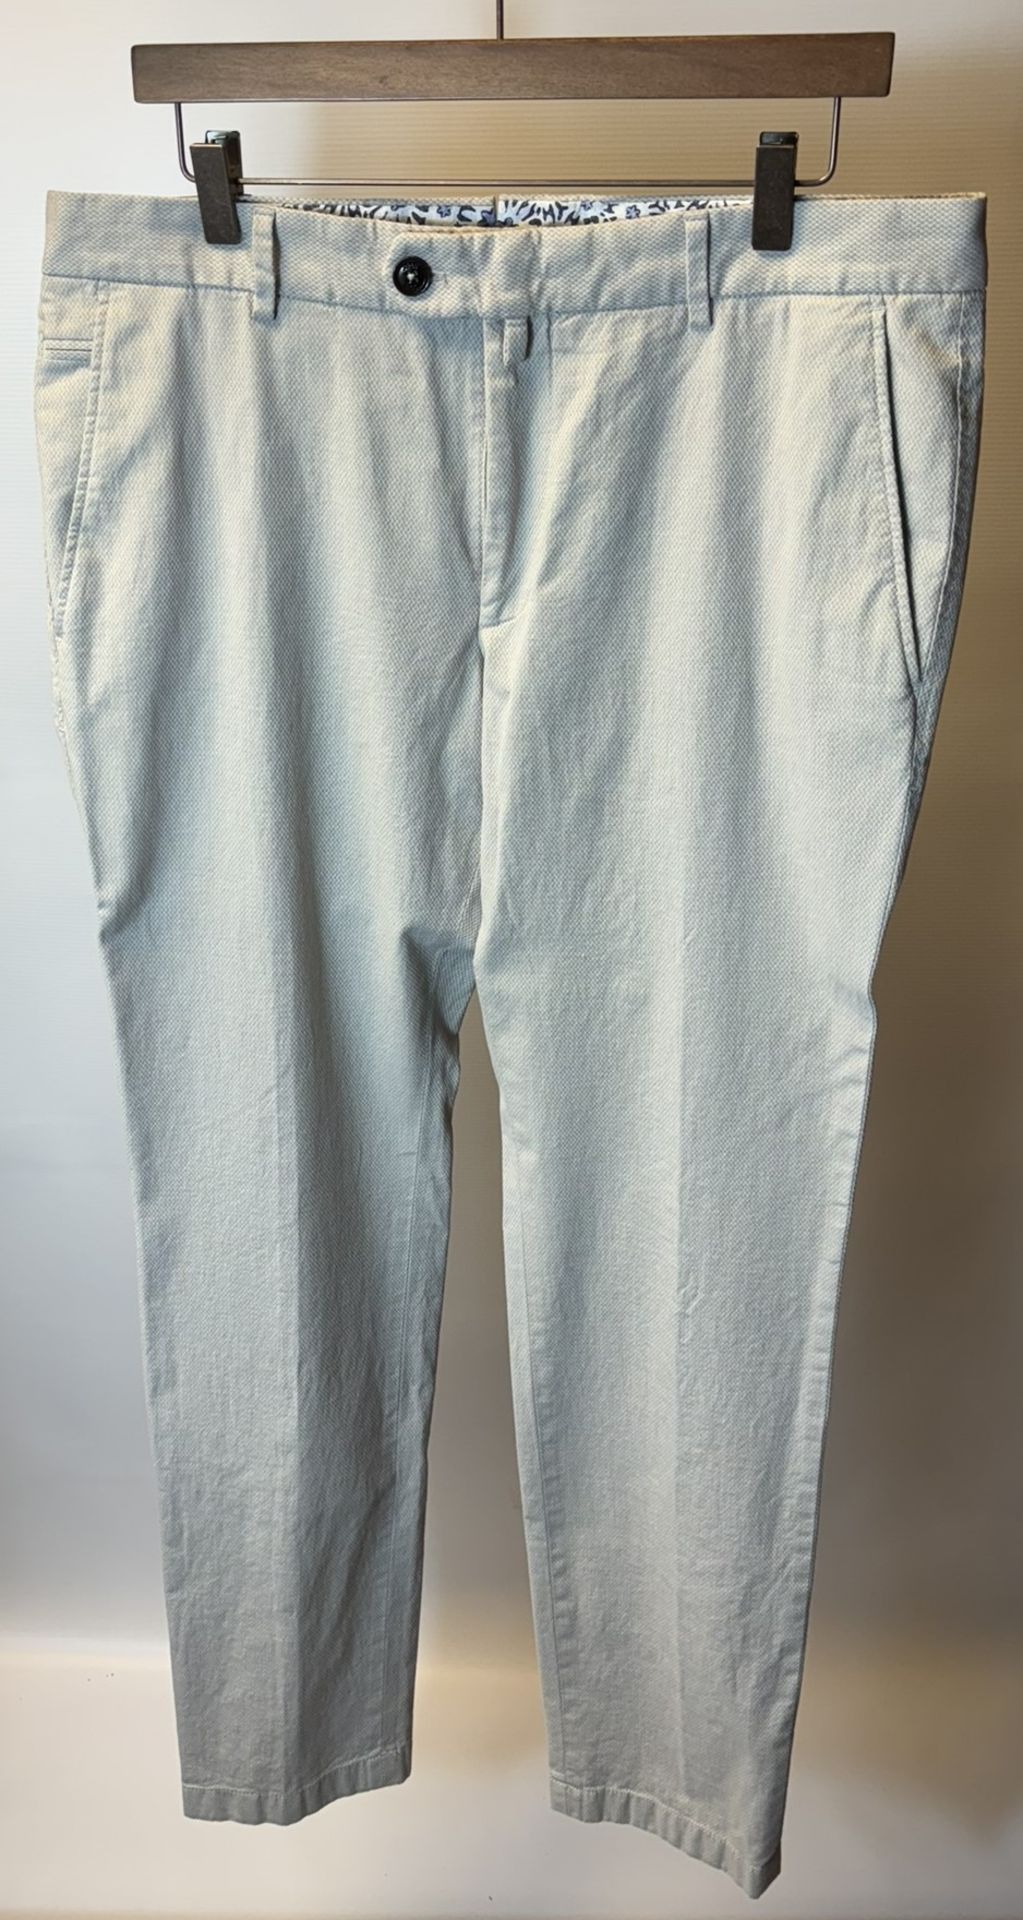 15 x Various Pairs Of Women's Trousers As Seen In Photos - Image 10 of 45